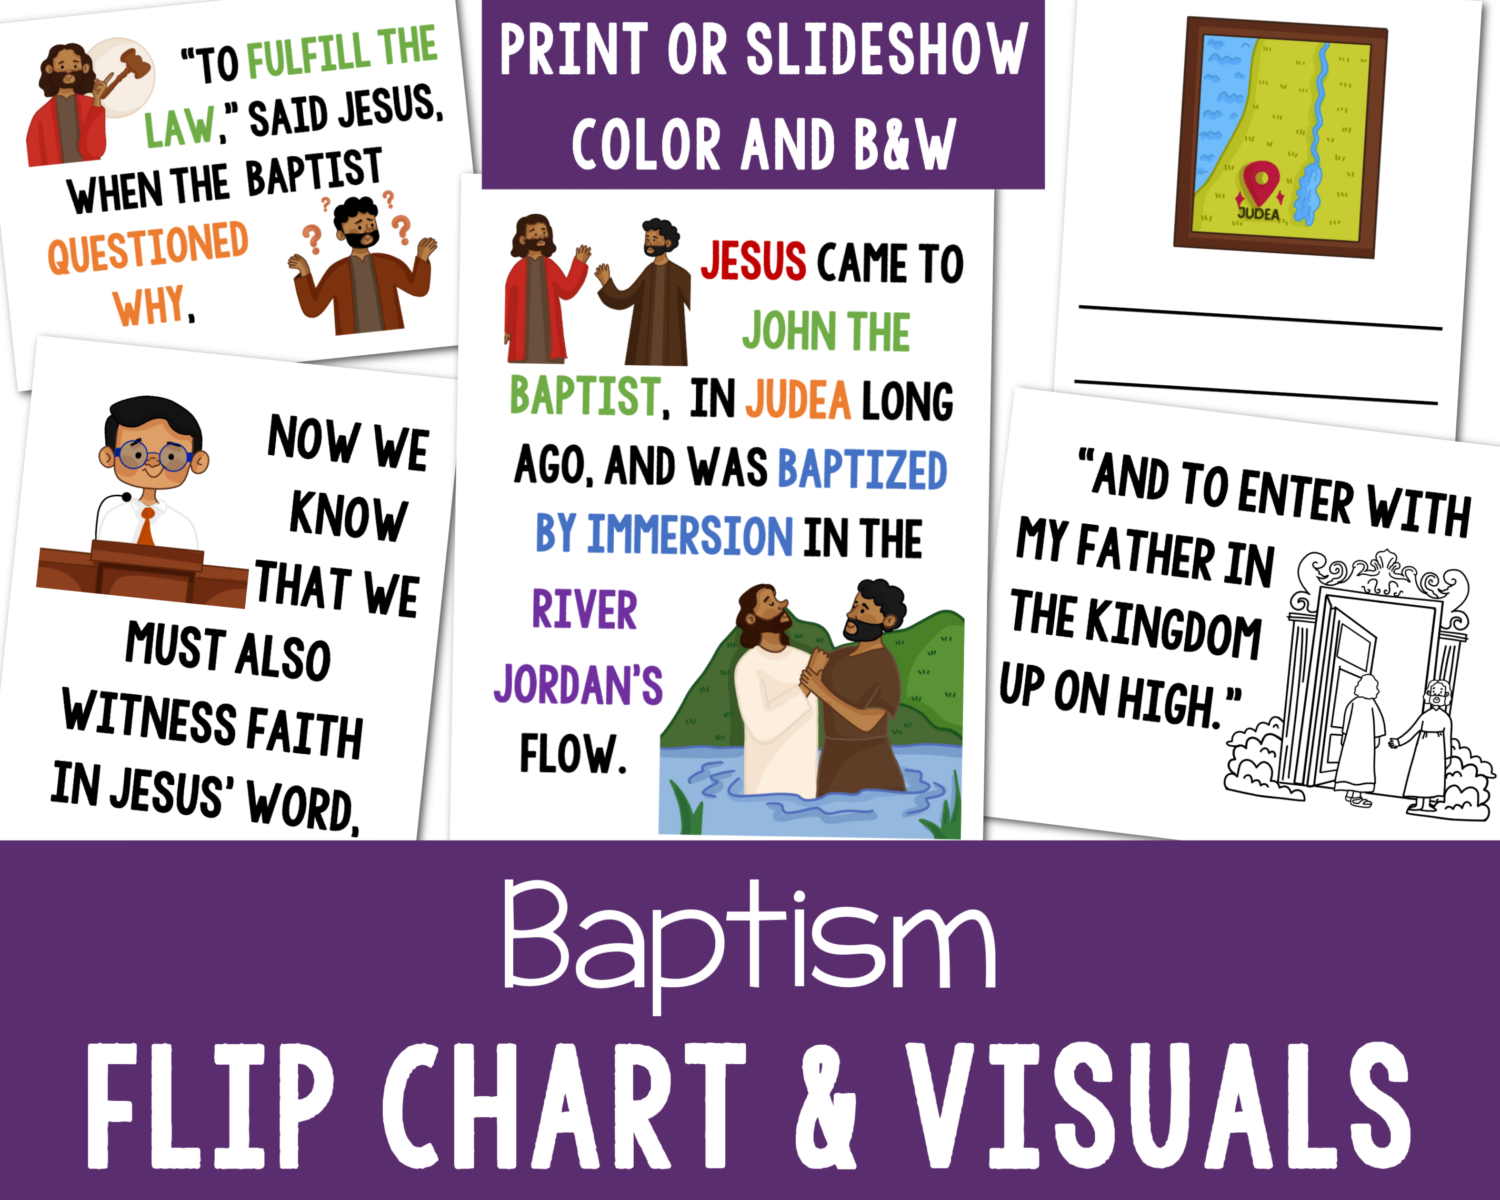 Baptism Flip Chart LDS Primary Song visual aids PDF printable and slideshow options for singing time Primary music leaders!